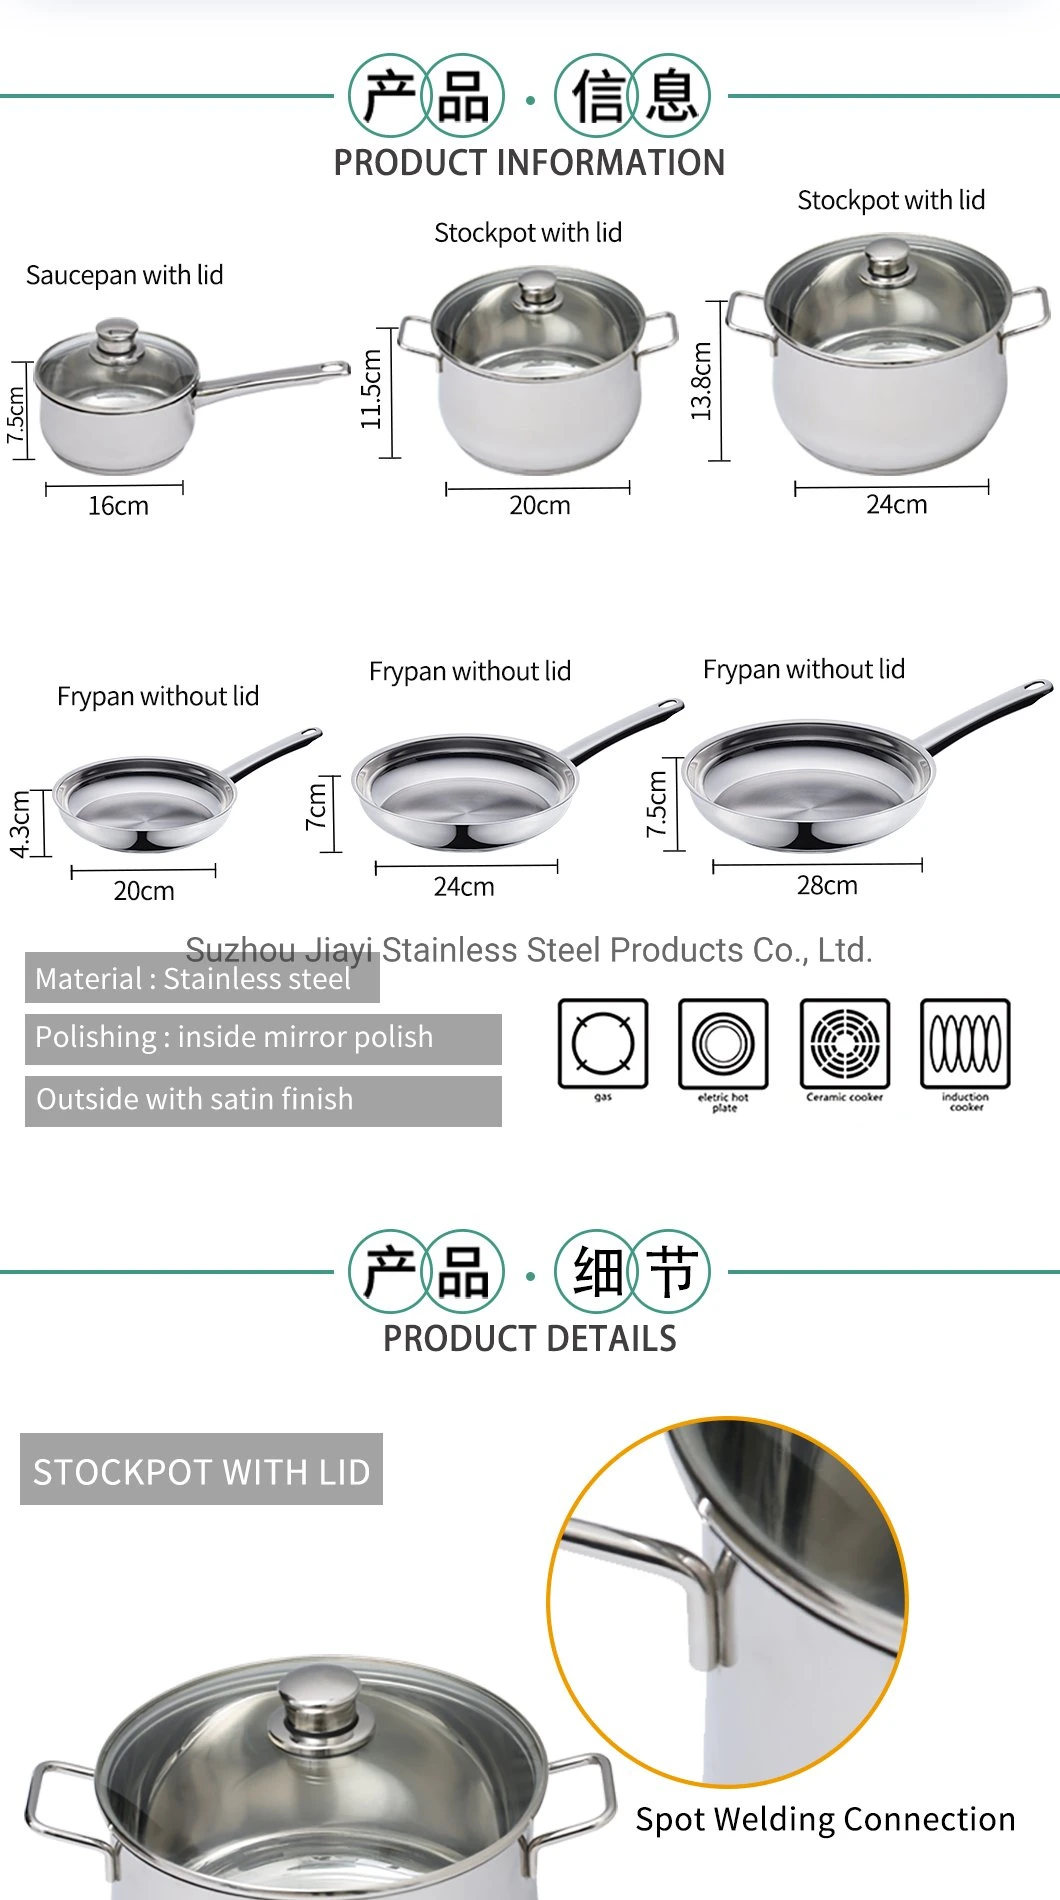 Stainless Steel Cookware Set with 16cm Saucepan 16 18 20 22 24 Casserole Pot and Fry Pan